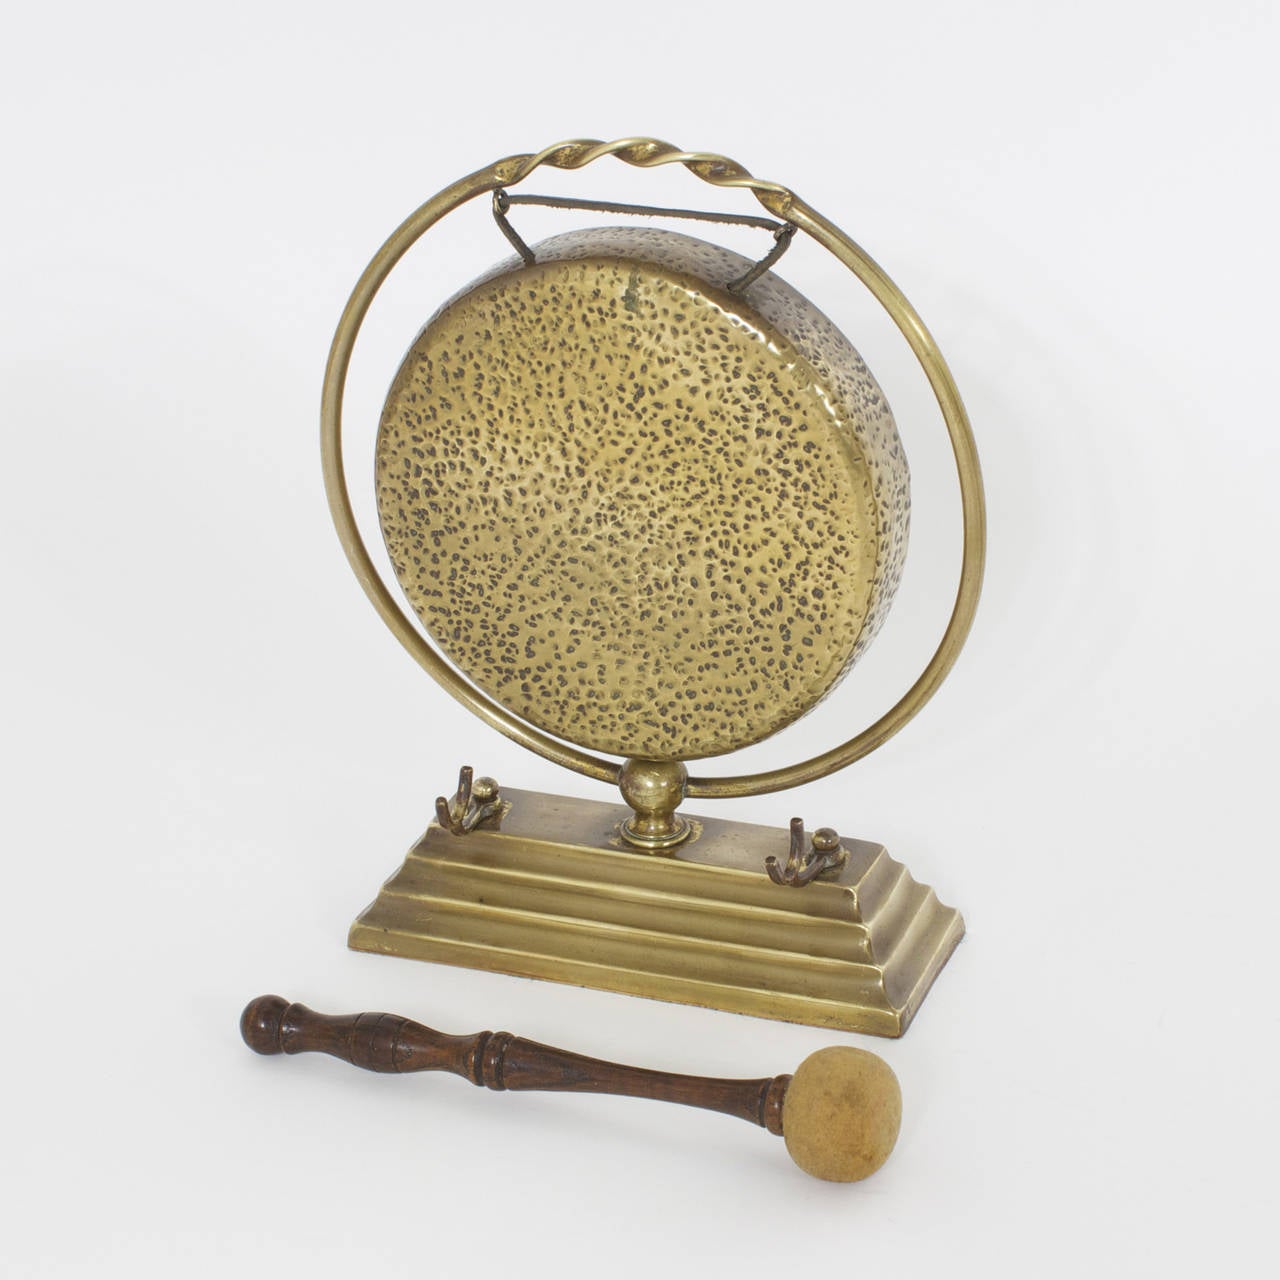 Diminutive, hand hammered brass dinner gong with a classic 4 tiered base and a hardwood turned mallet, that when rung has a beautiful resonant sound. Nicely polished.